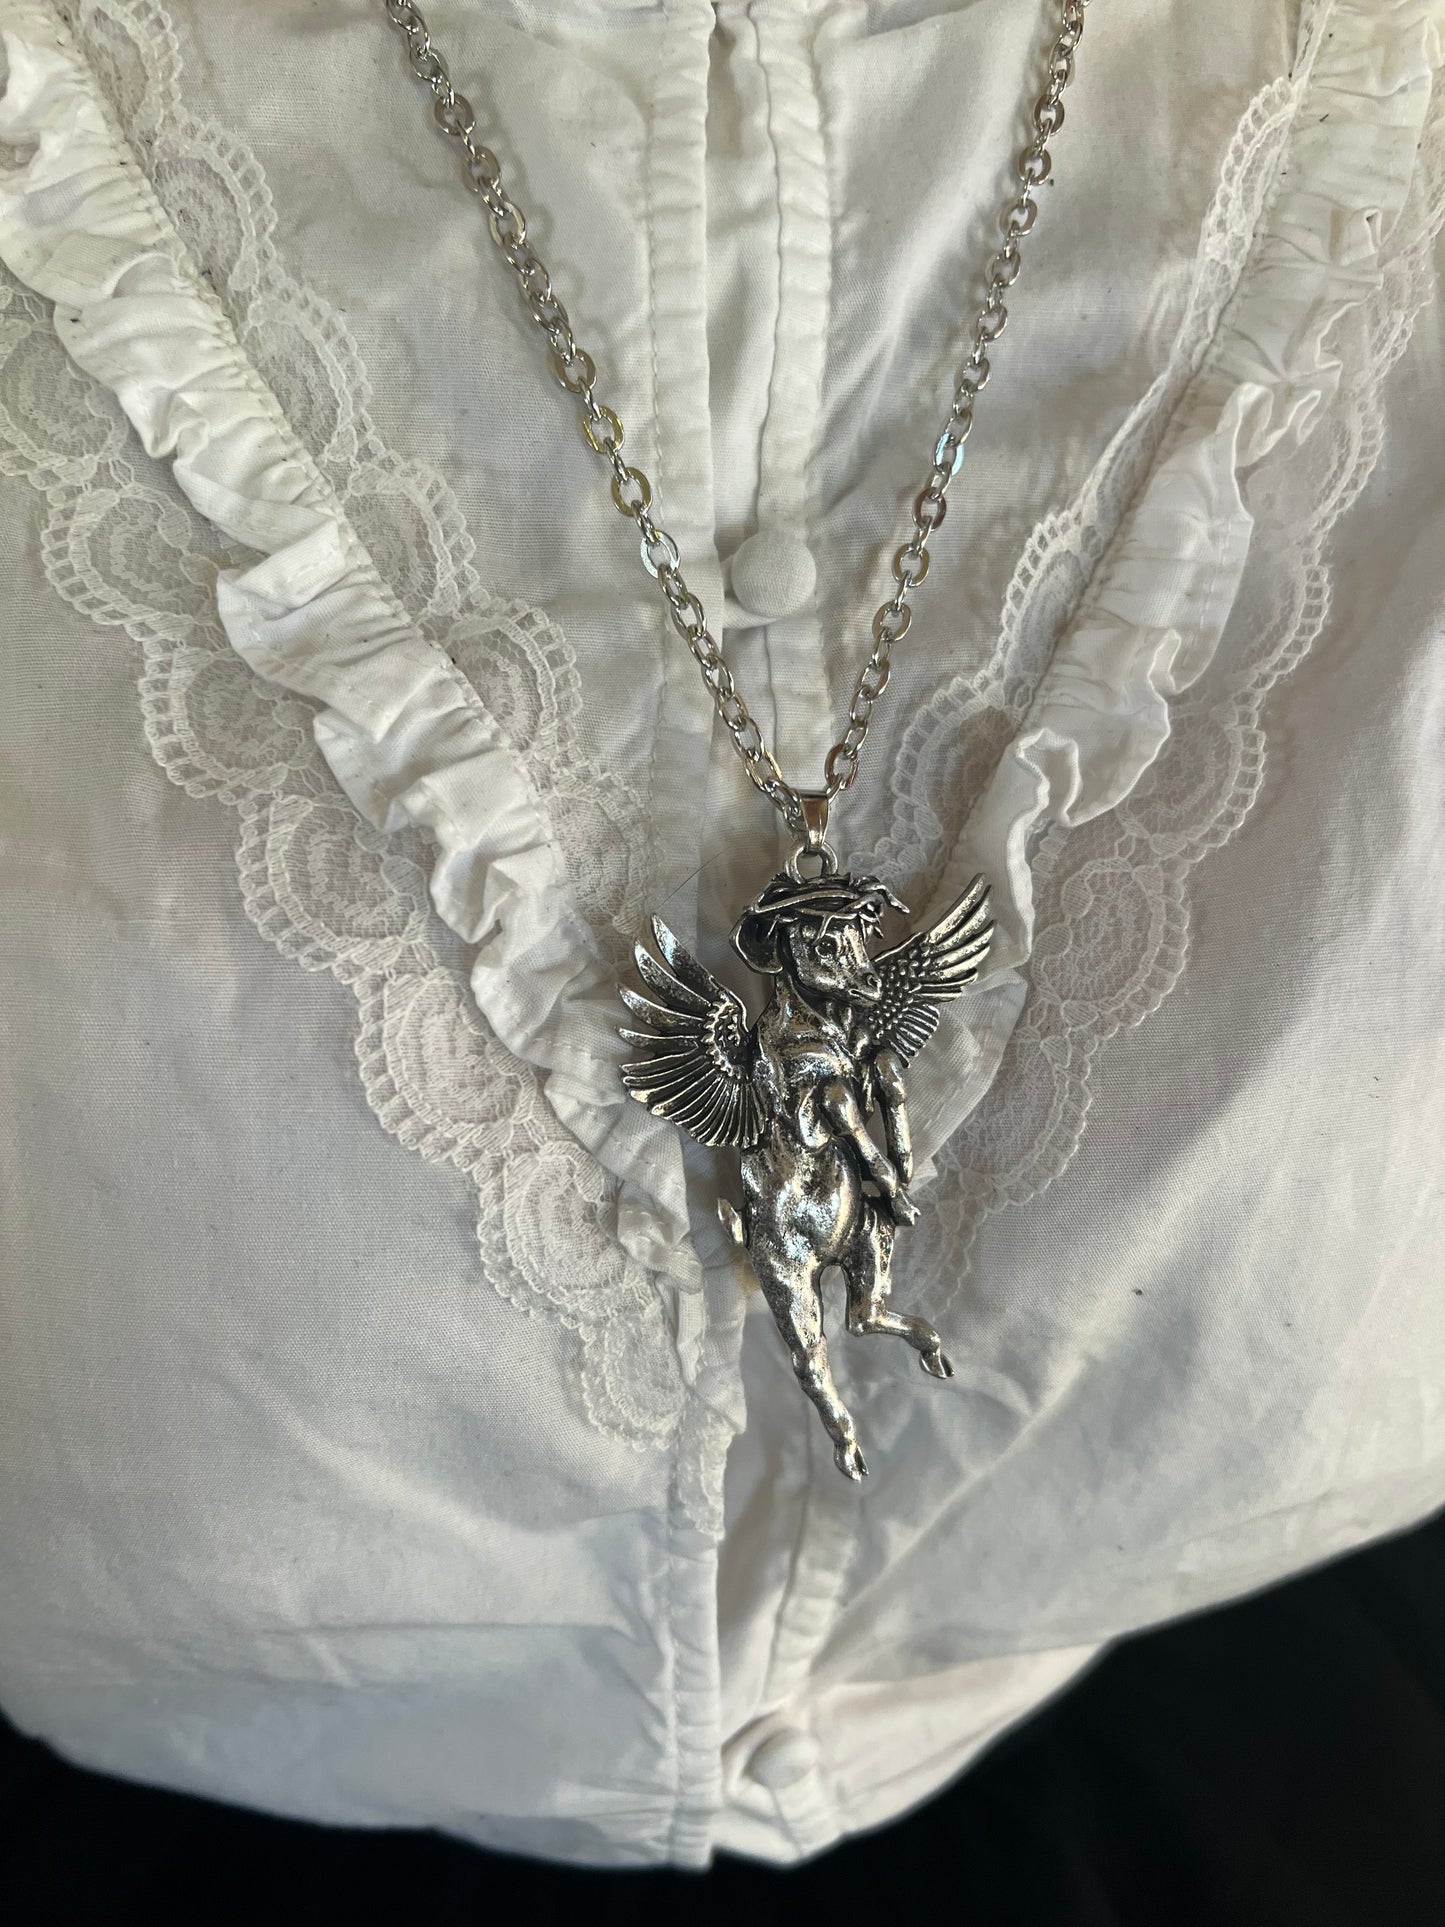 HEAVENLY BODY - Mother of Hades Cast Necklace